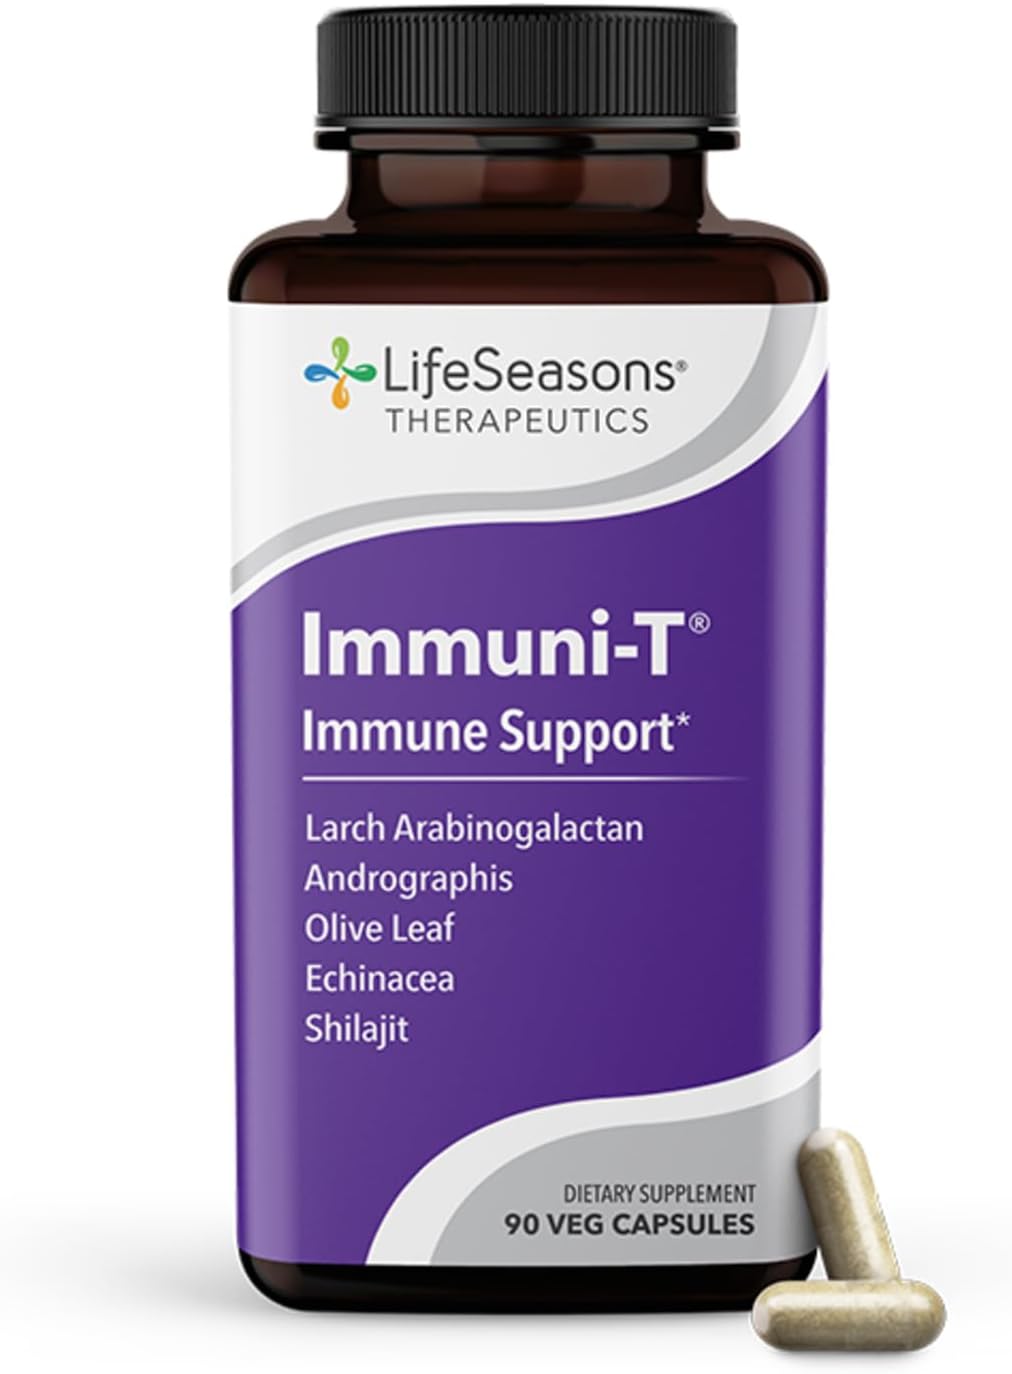 Immuni-T - Immune Support - Vitamin Supplement for Cold & Flu Relief - Natural Immunity System Booster - Black Elderberry, Echinacea, Andrographis, Arabinogalactans & Olive leaf - 90 Capsules